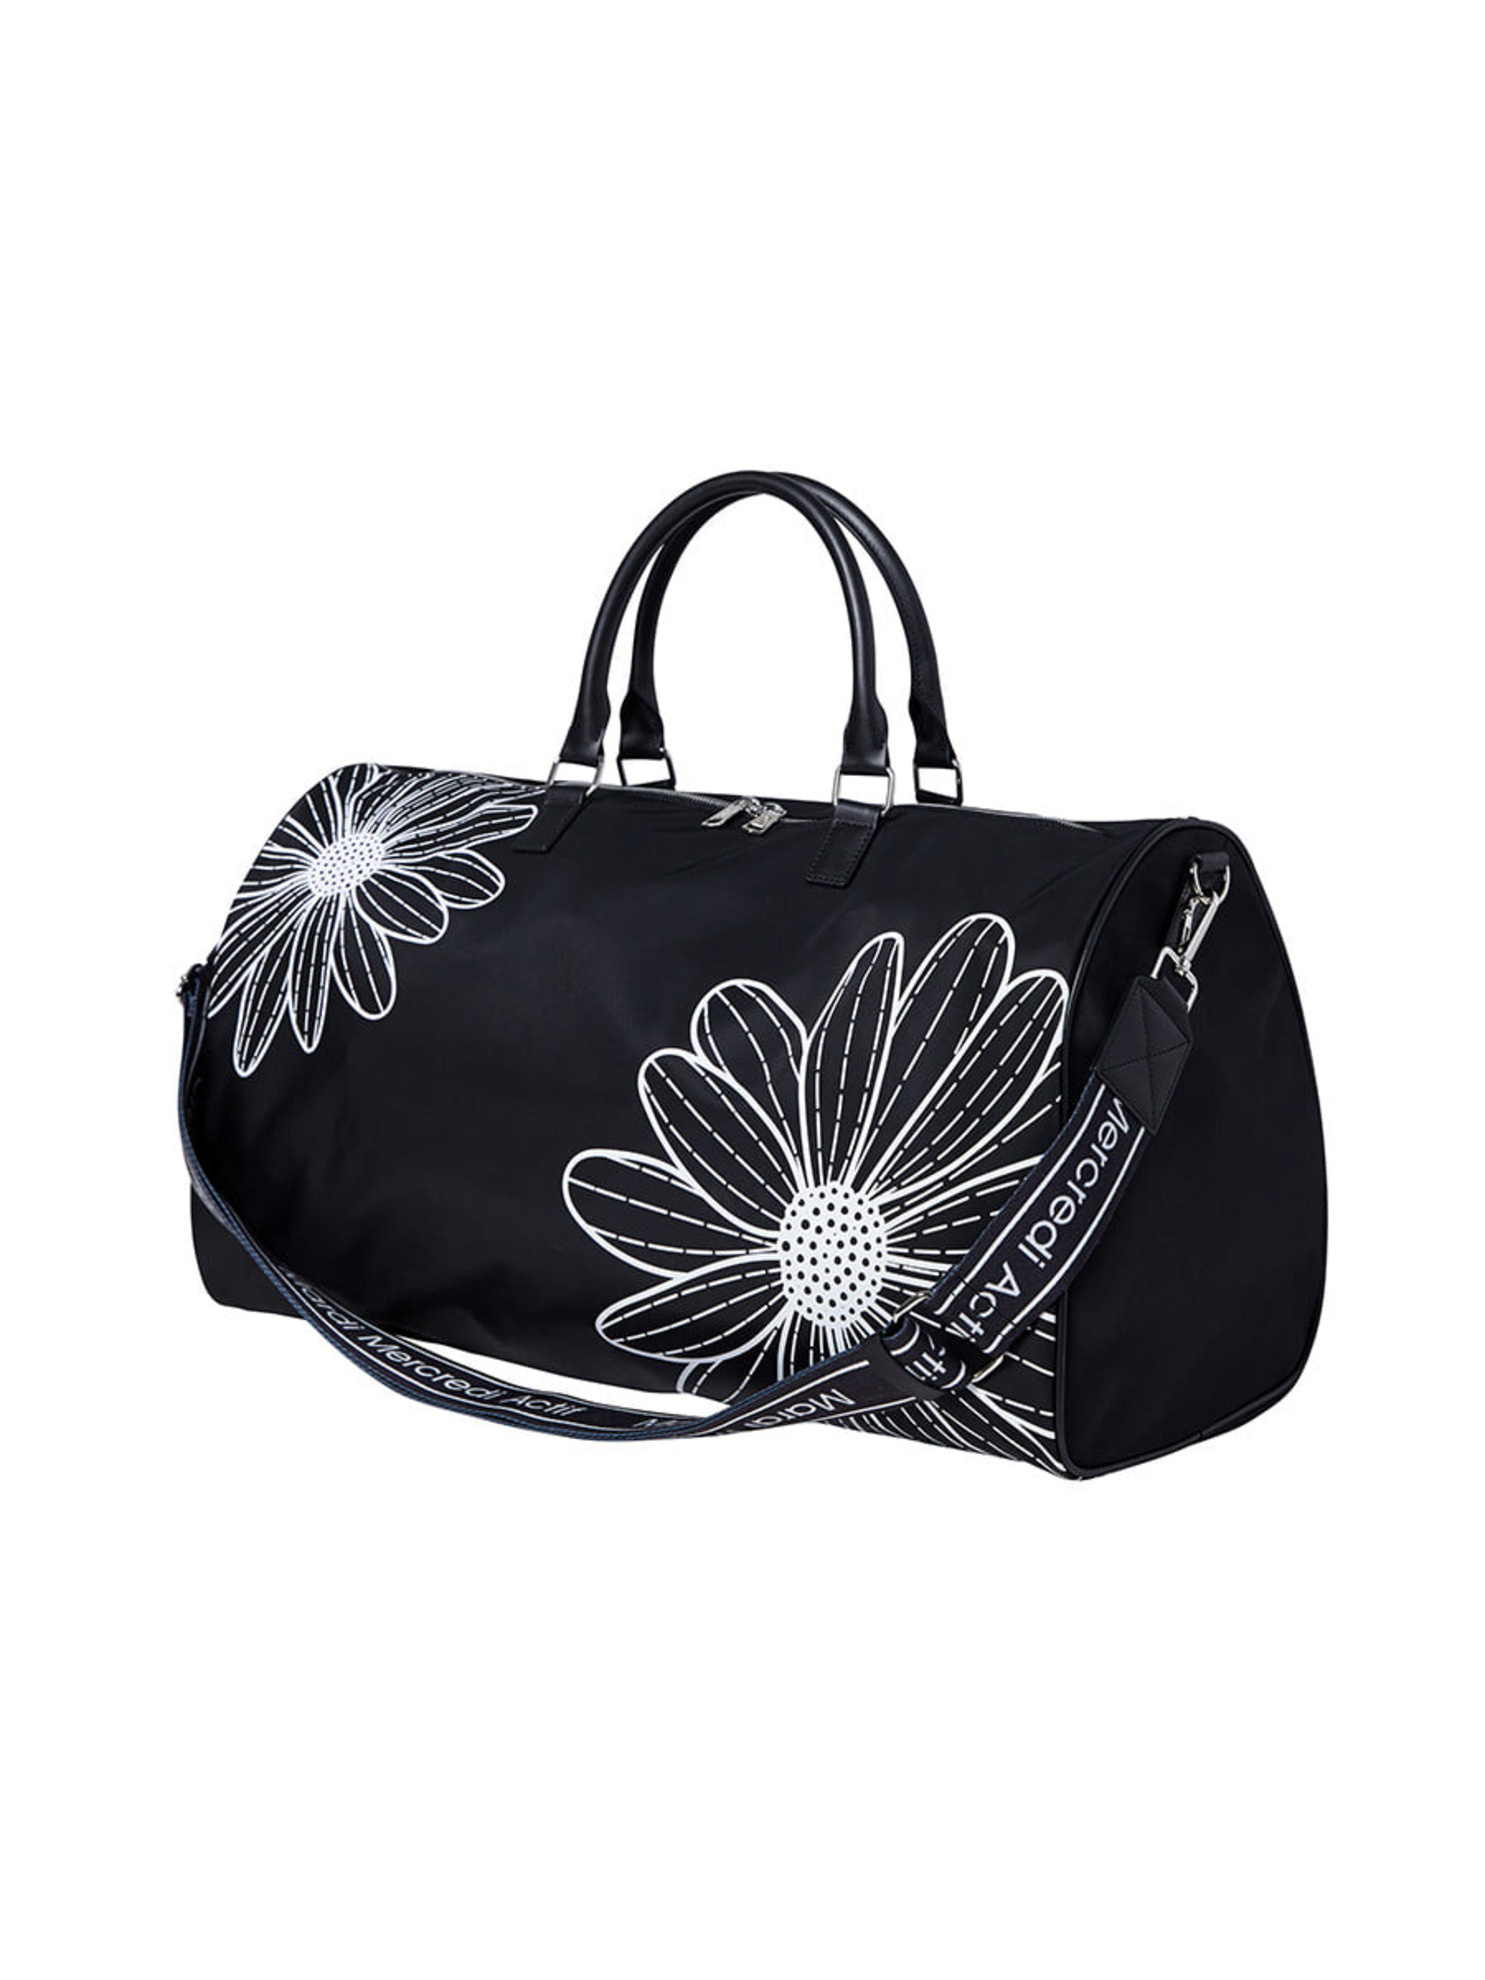 ALL OVER FLOWERS PRINTED BOSTON BAG_BLACK RED